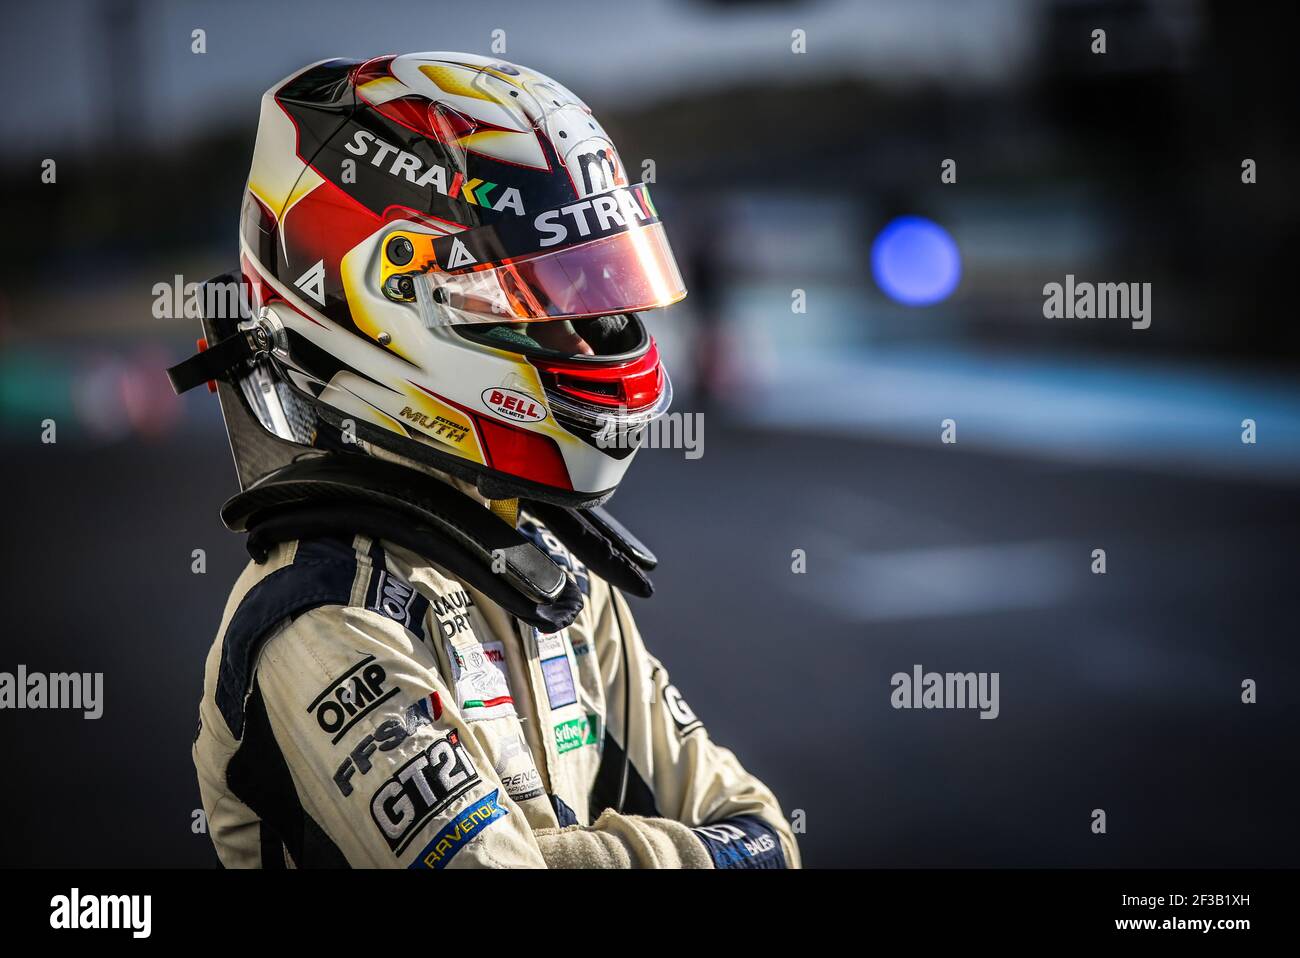 MUTH Esteban (bel), Formula Renault Eurocup team M2 competition, portrait  during the winter tests Formule Renault Eurocup at Magny cours, March 5 to  7, 2019 - Photo Jean Michel Le Meur / DPPI Stock Photo - Alamy